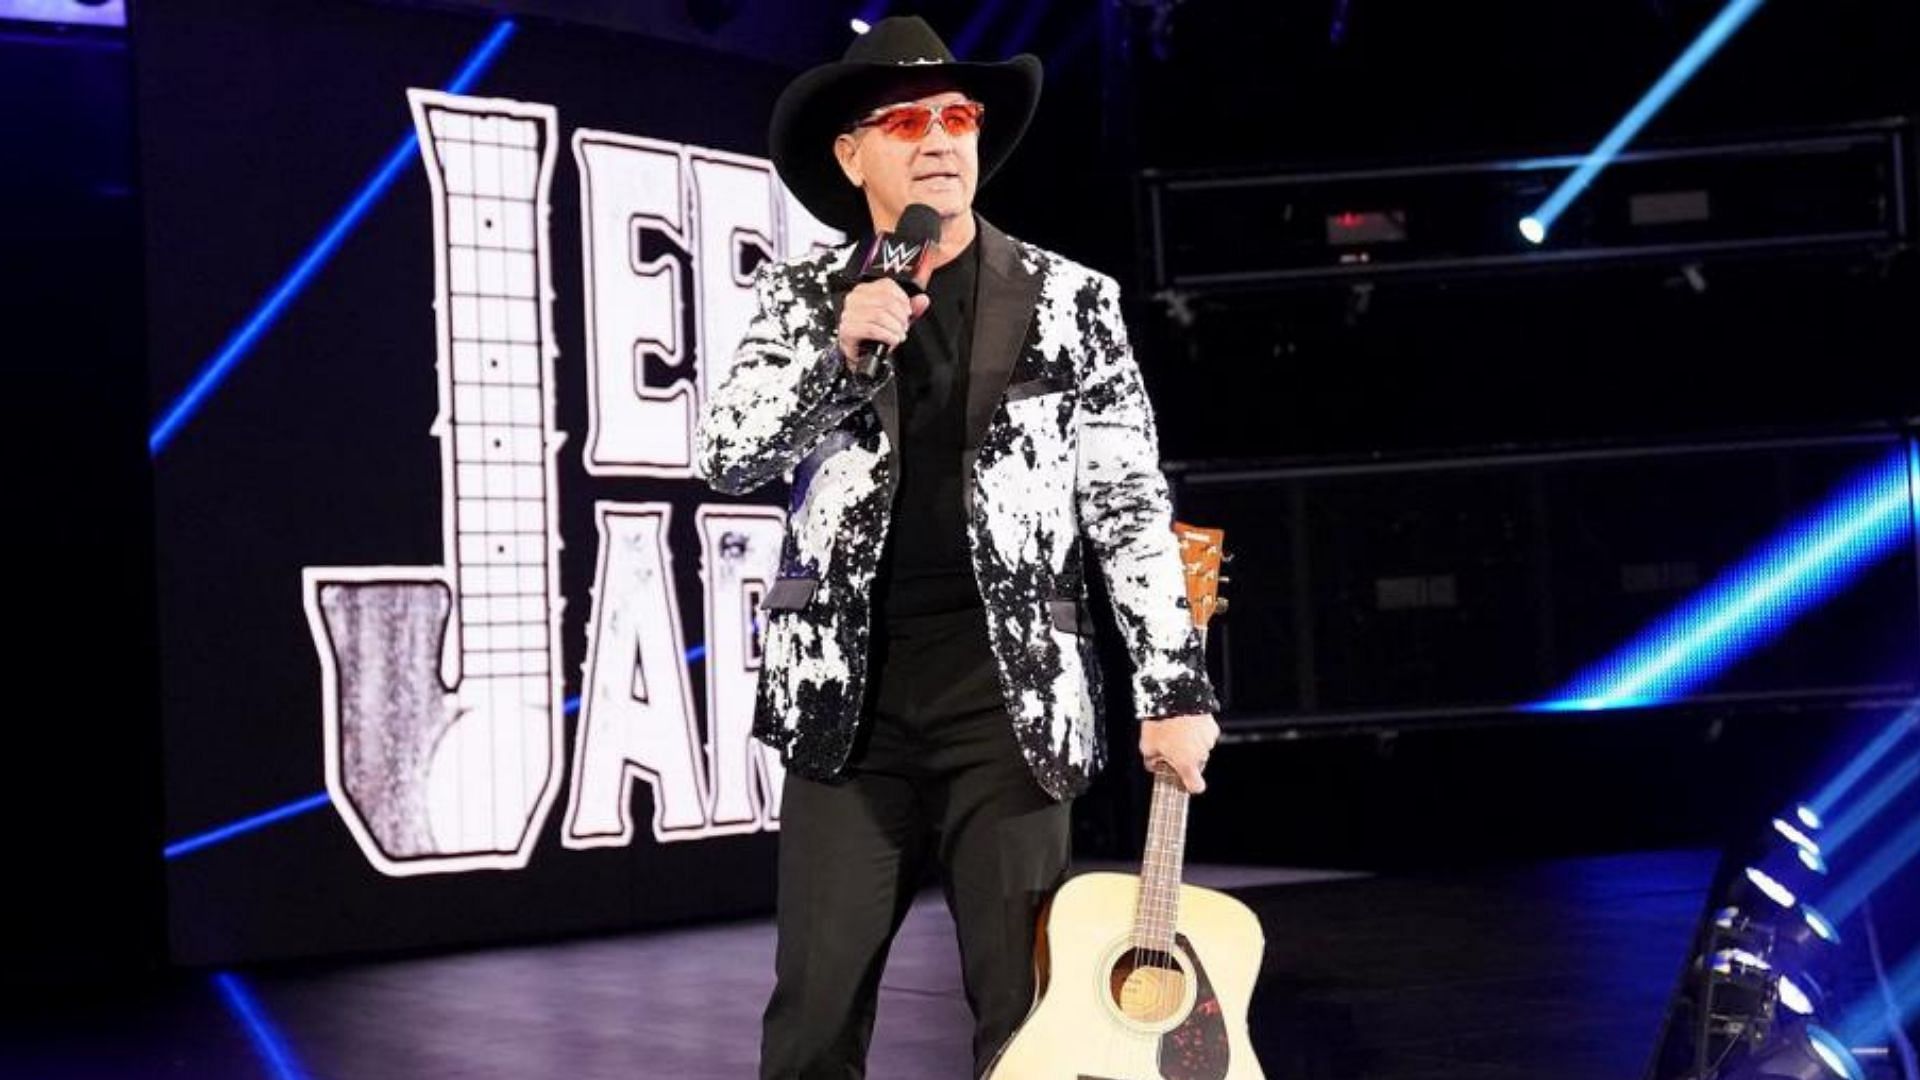 Jeff Jarrett joined the WWE Hall of Fame in 2018